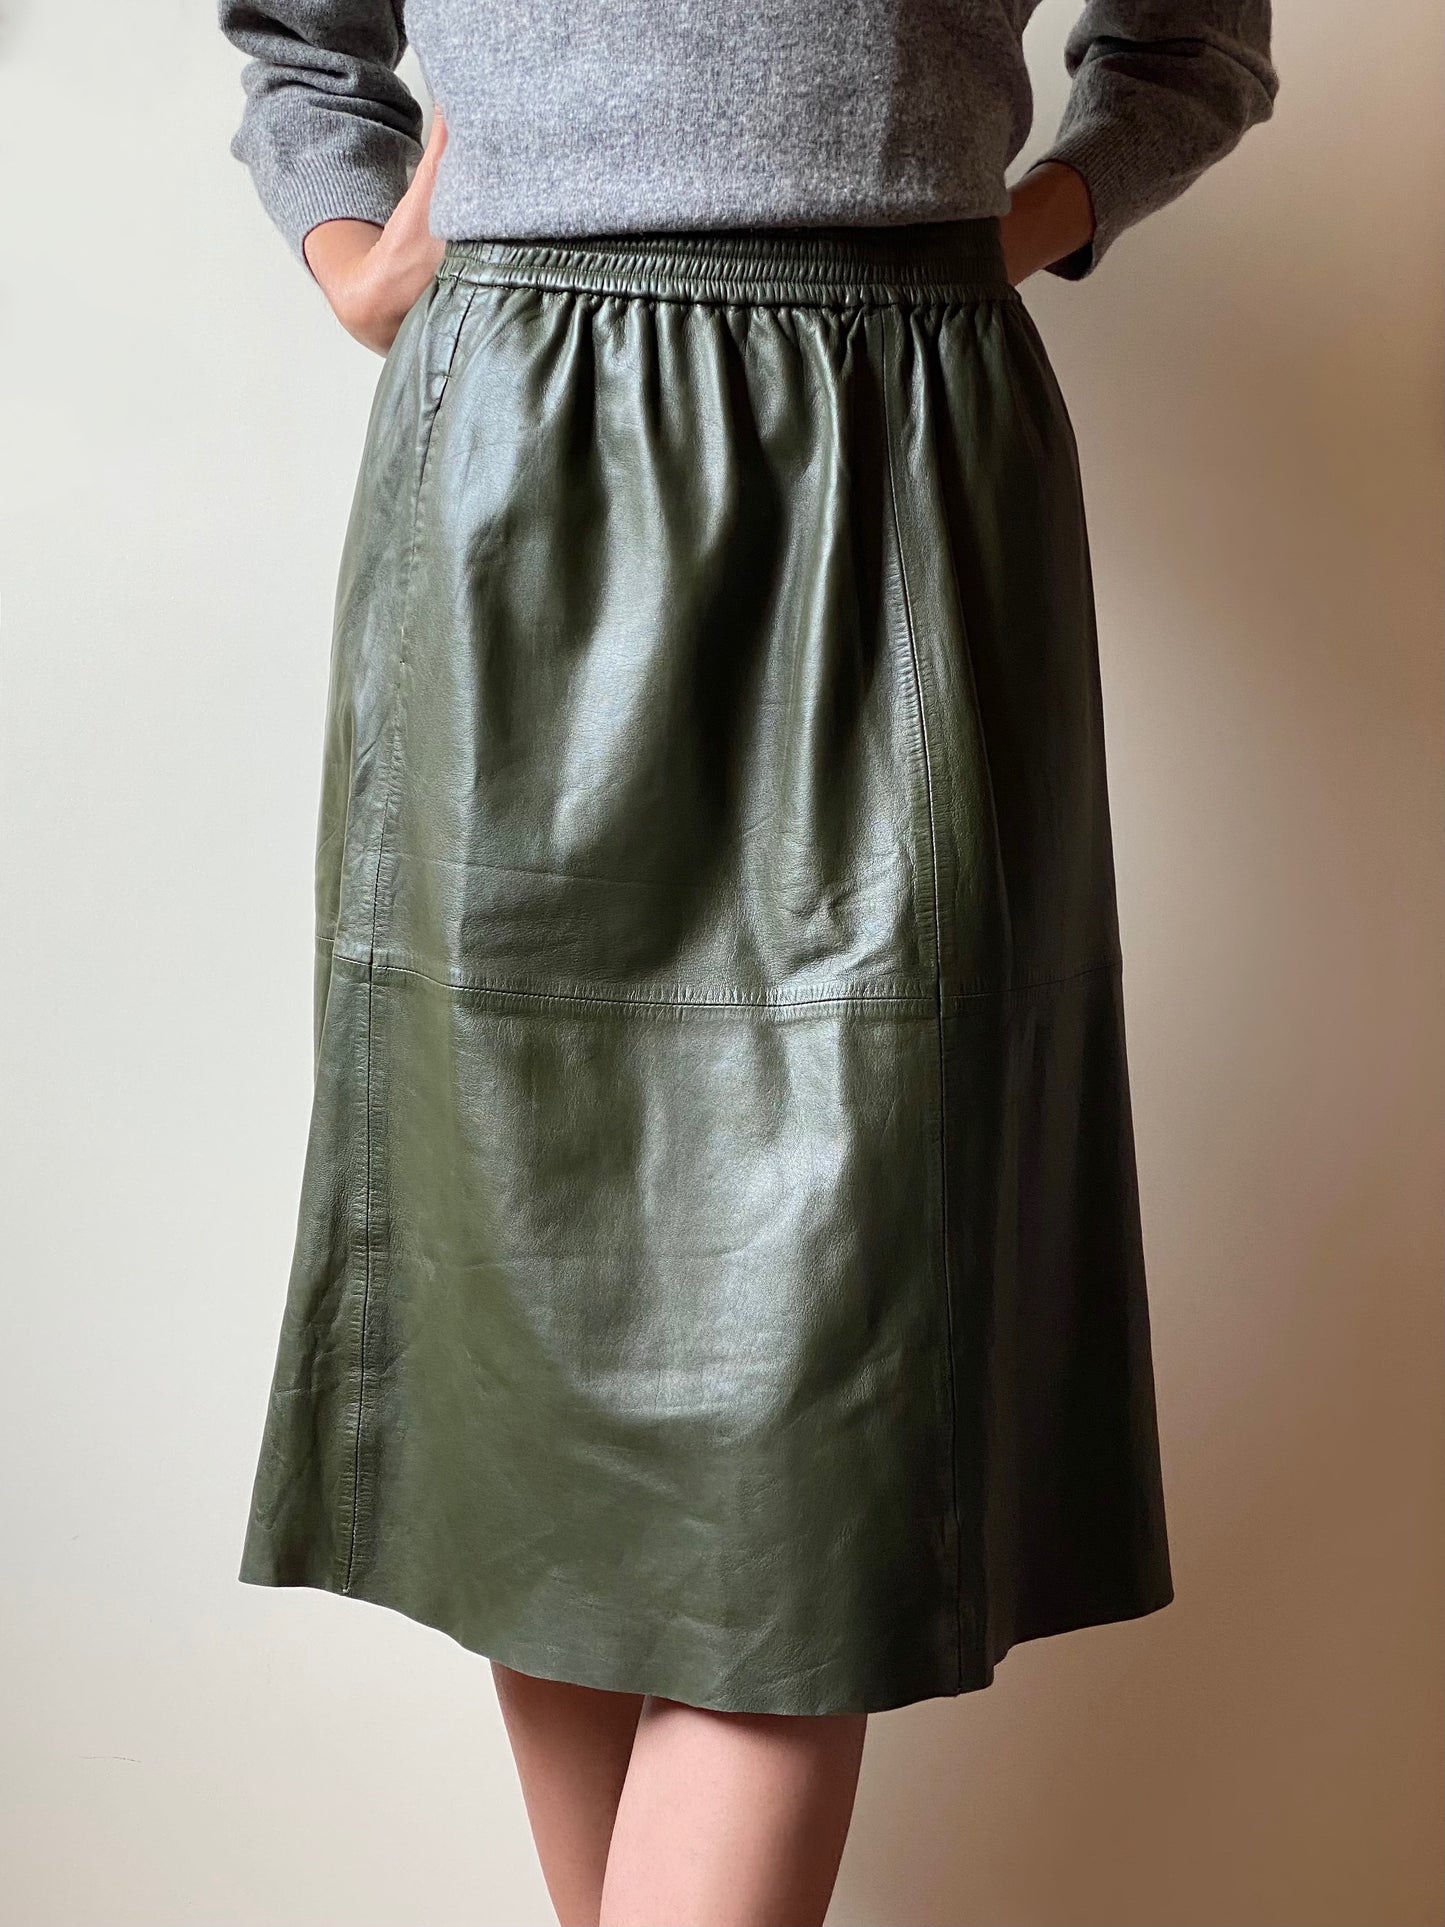 Real Leather Olive Green Skirt